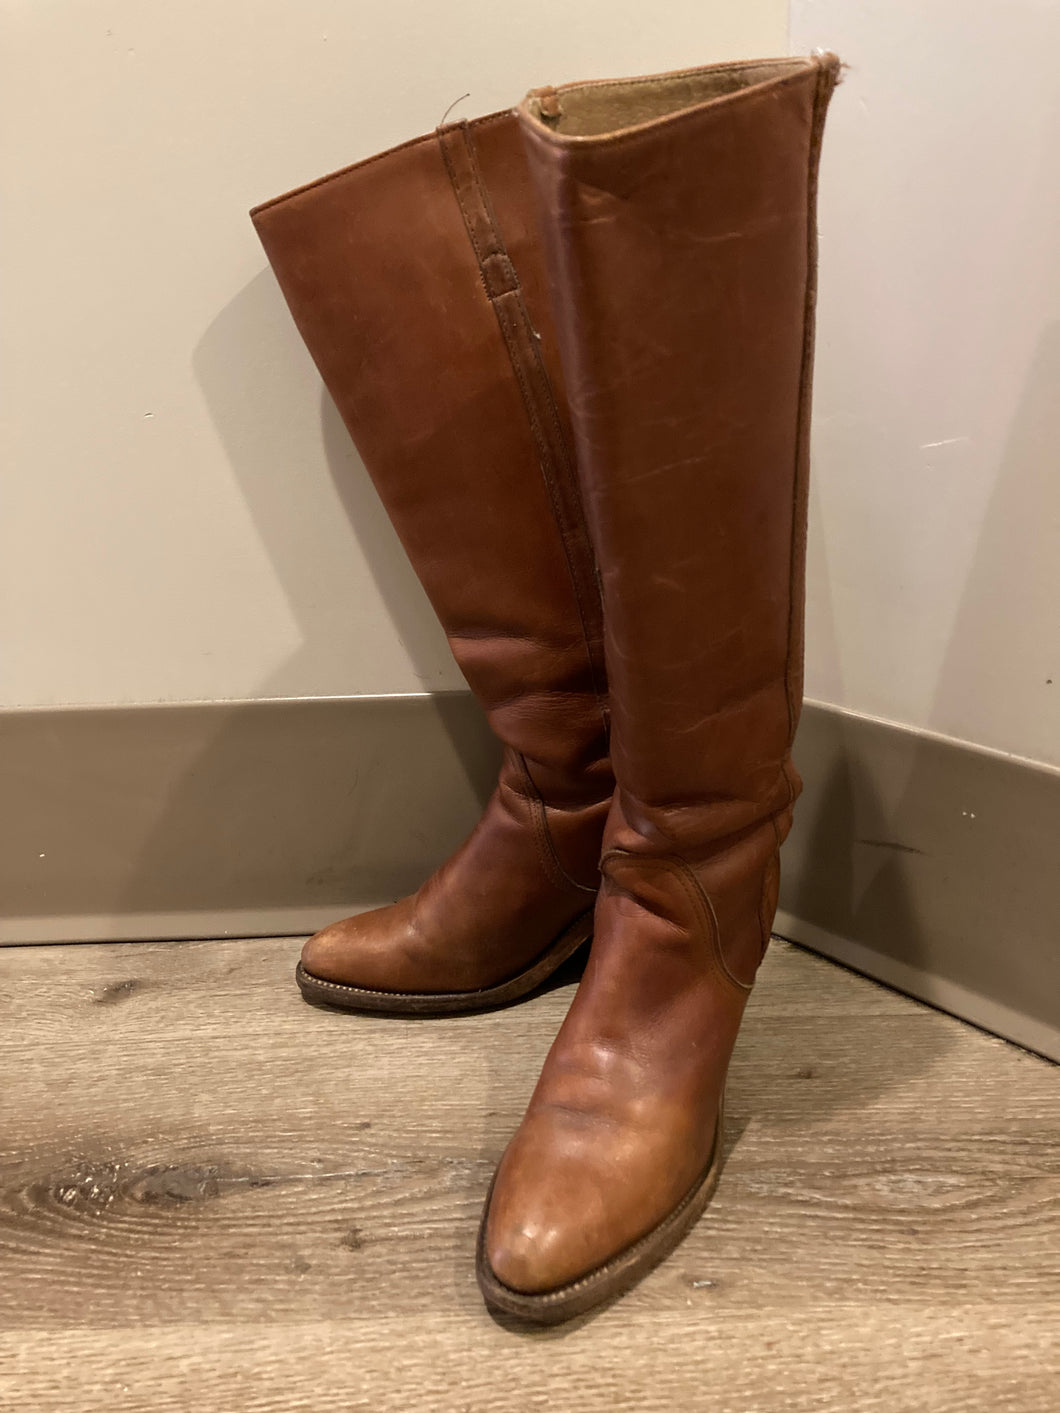 Vintage Frye brown leather knee high boots with 3